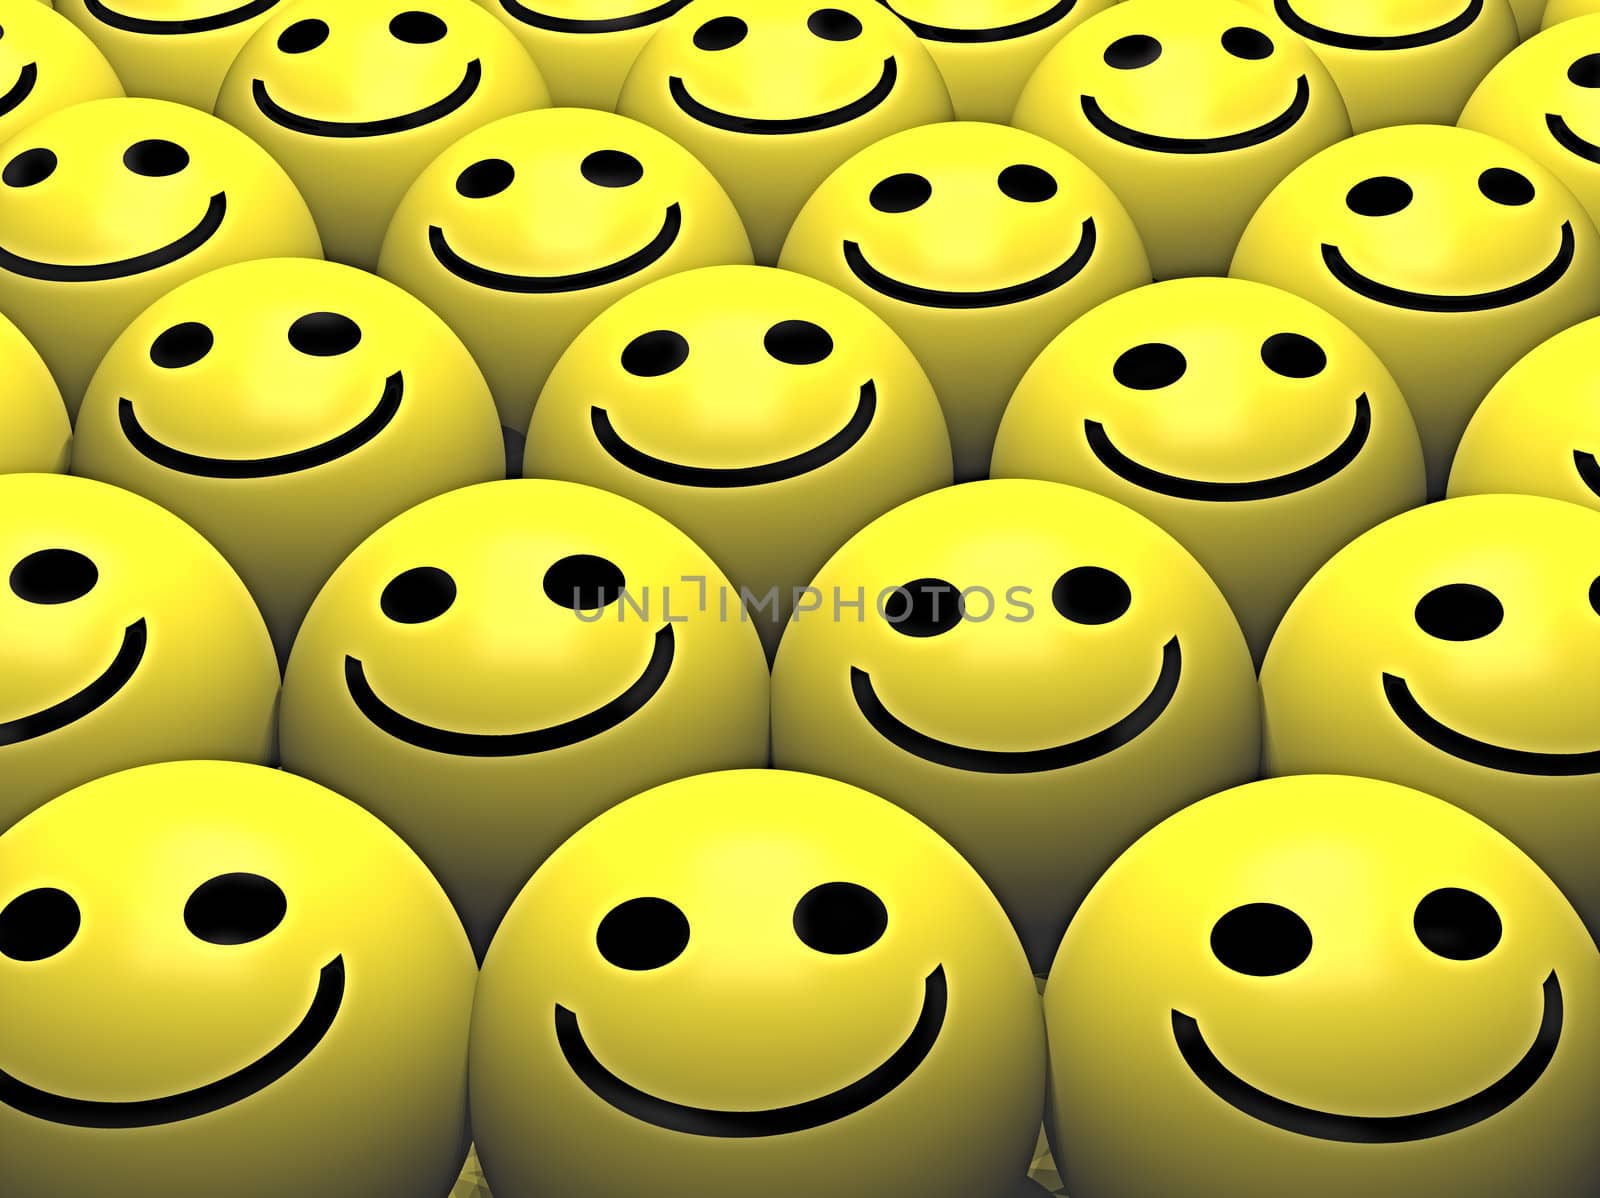 A group pf smileys with happy smiles